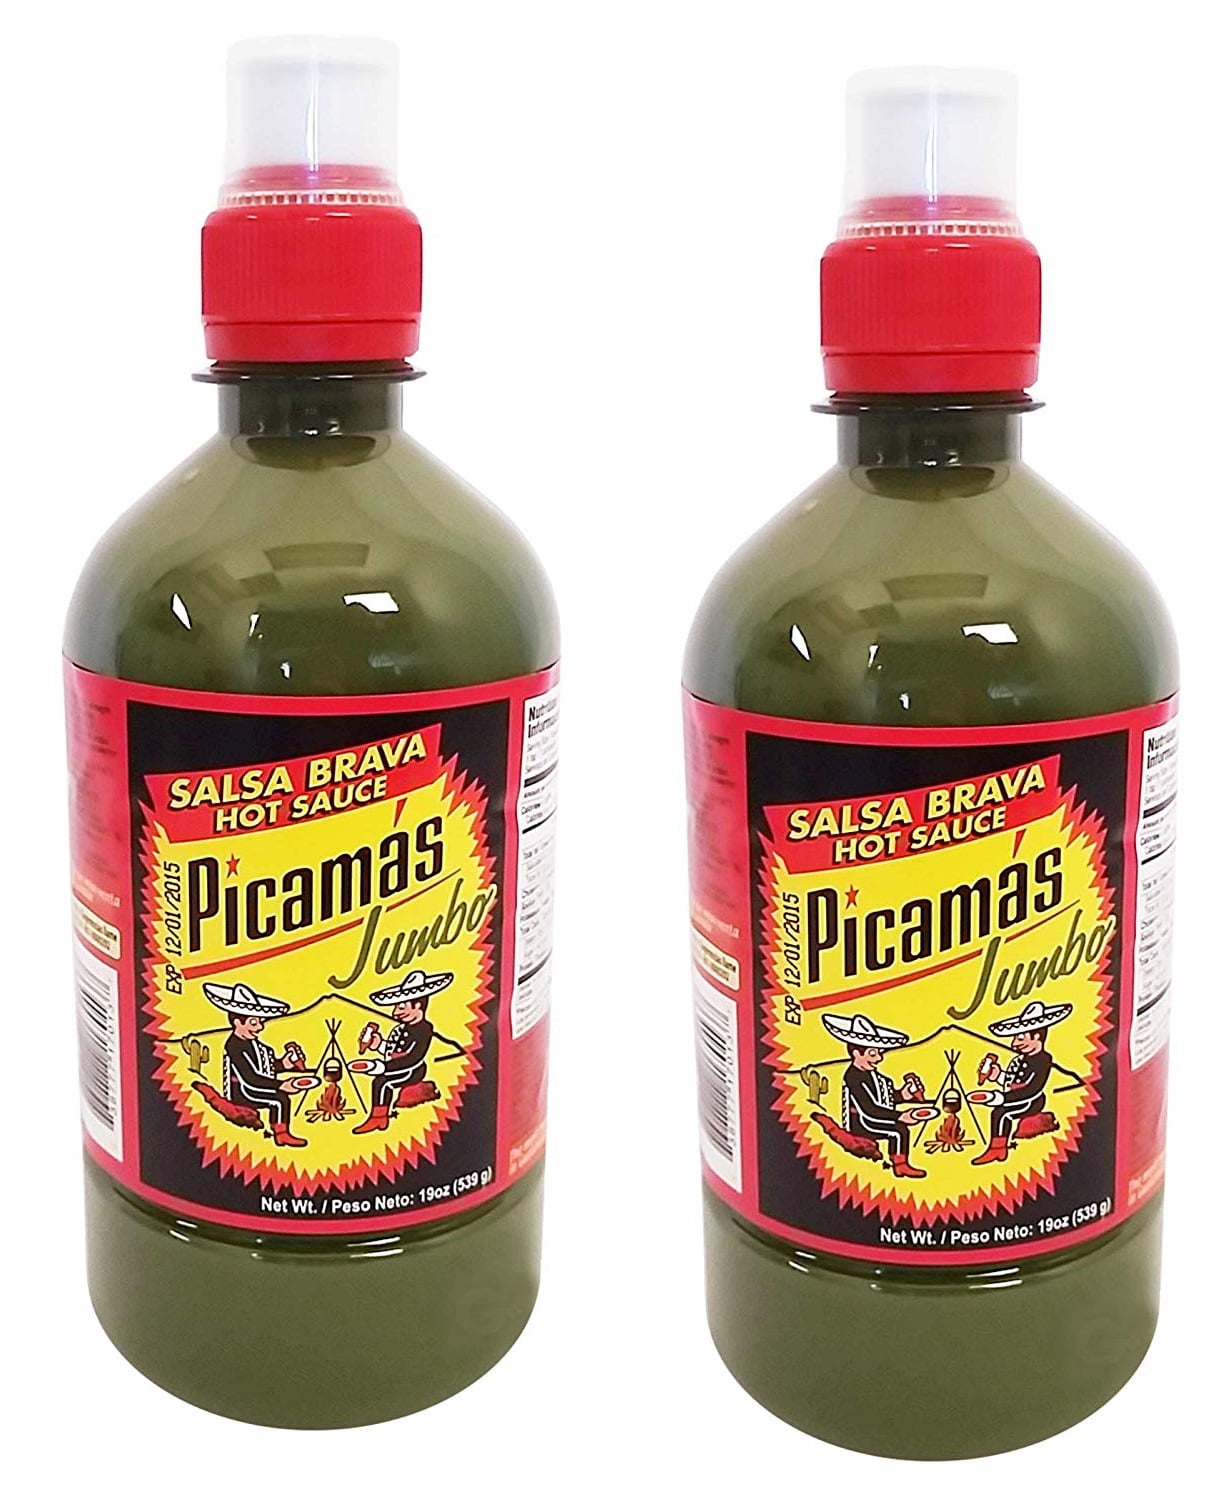 Pico Pica Mexican Hot Sauce 2 Pack - Hot - 15.5 oz (2 Large Plastic bottles)